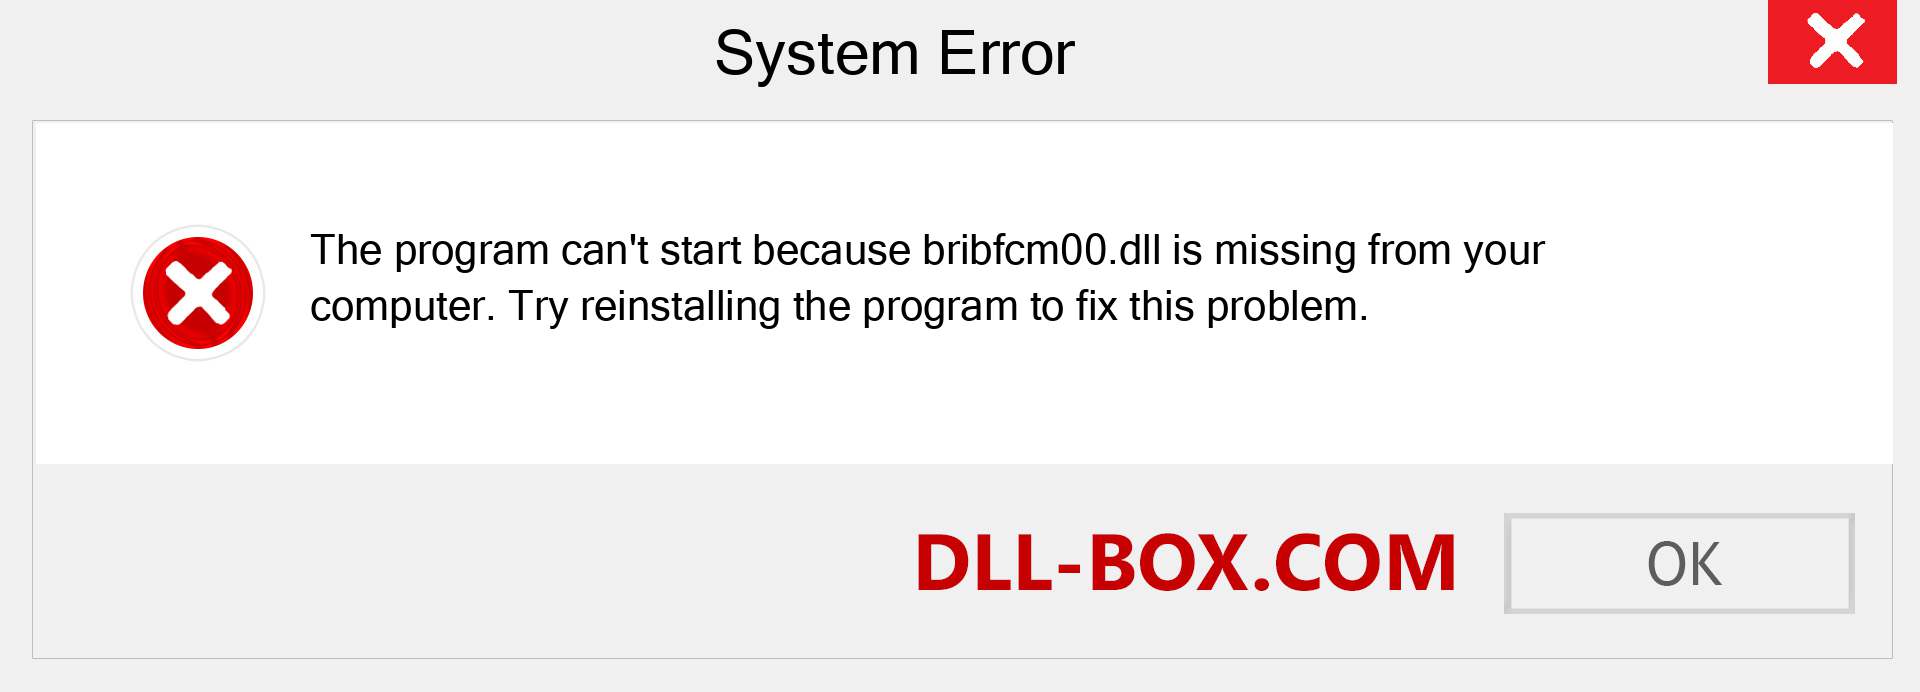  bribfcm00.dll file is missing?. Download for Windows 7, 8, 10 - Fix  bribfcm00 dll Missing Error on Windows, photos, images